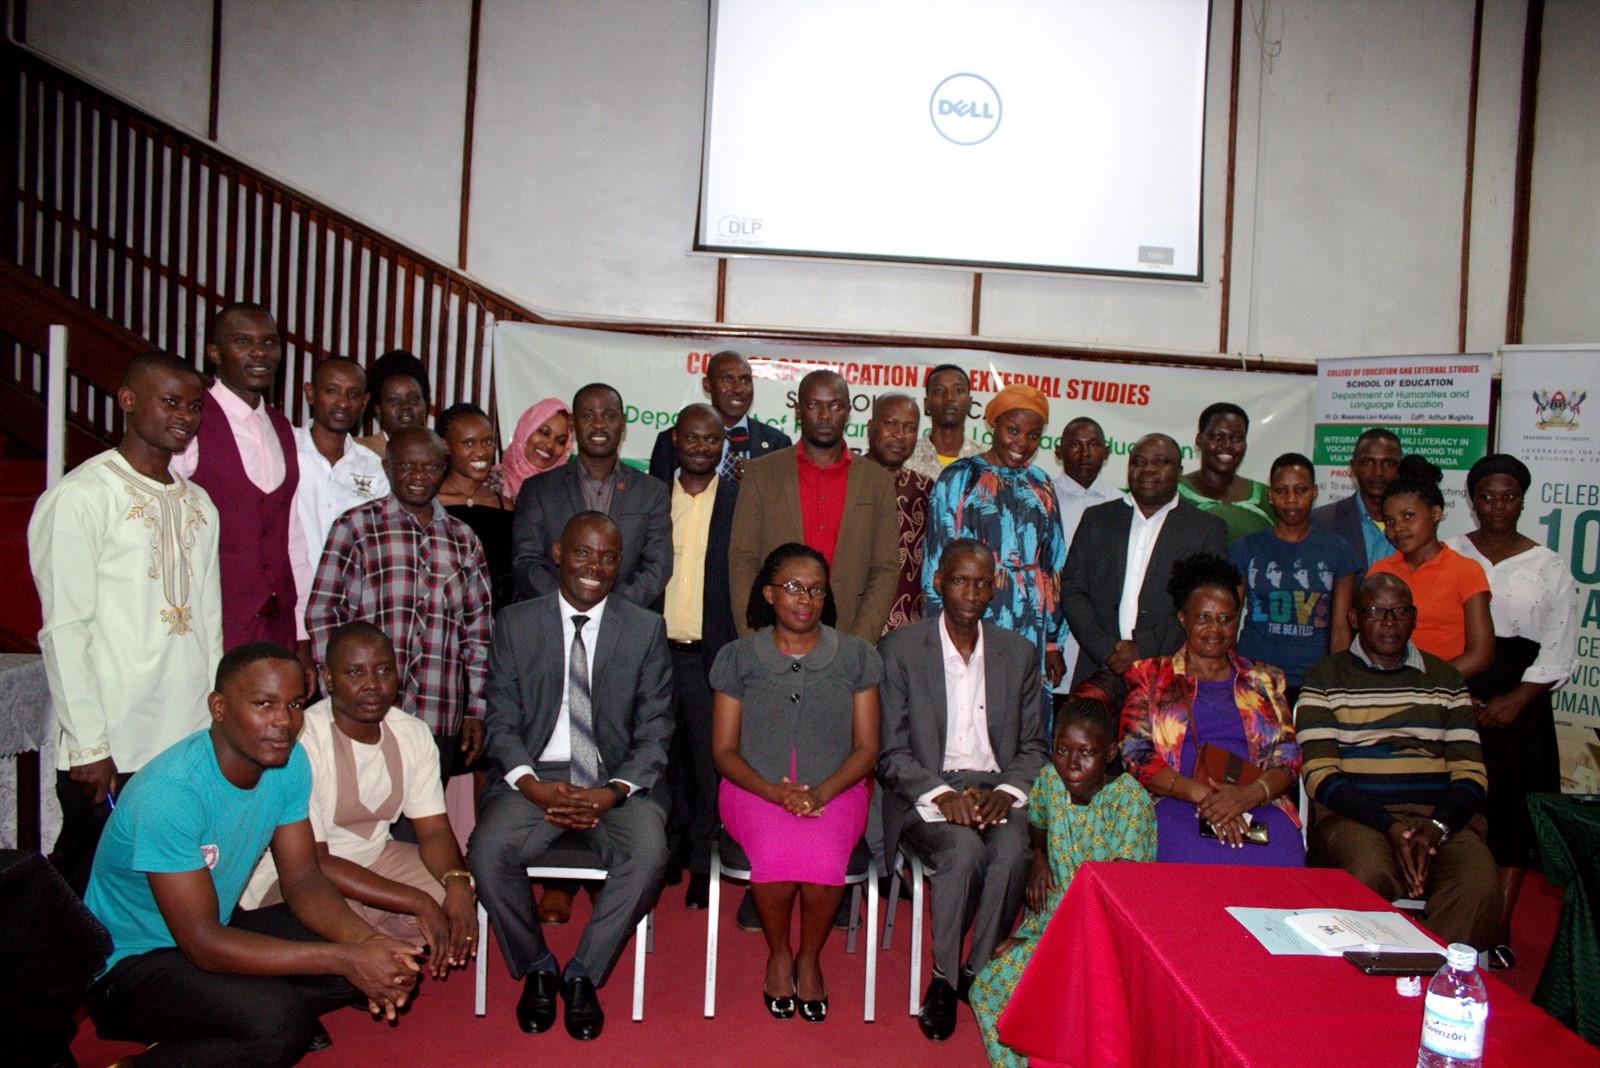 Front Row: The Principal CEES-Prof. Anthony Muwagga Mugagga (Centre) and Dean School of Education-Prof. Mathias Mulumba (Right) with other officials and participants at the launch of the Integrating Kiswahili Literacy in Vocational Skilling project on 24th April 2023 in the AVU Conference Room, CEES, Makerere University.